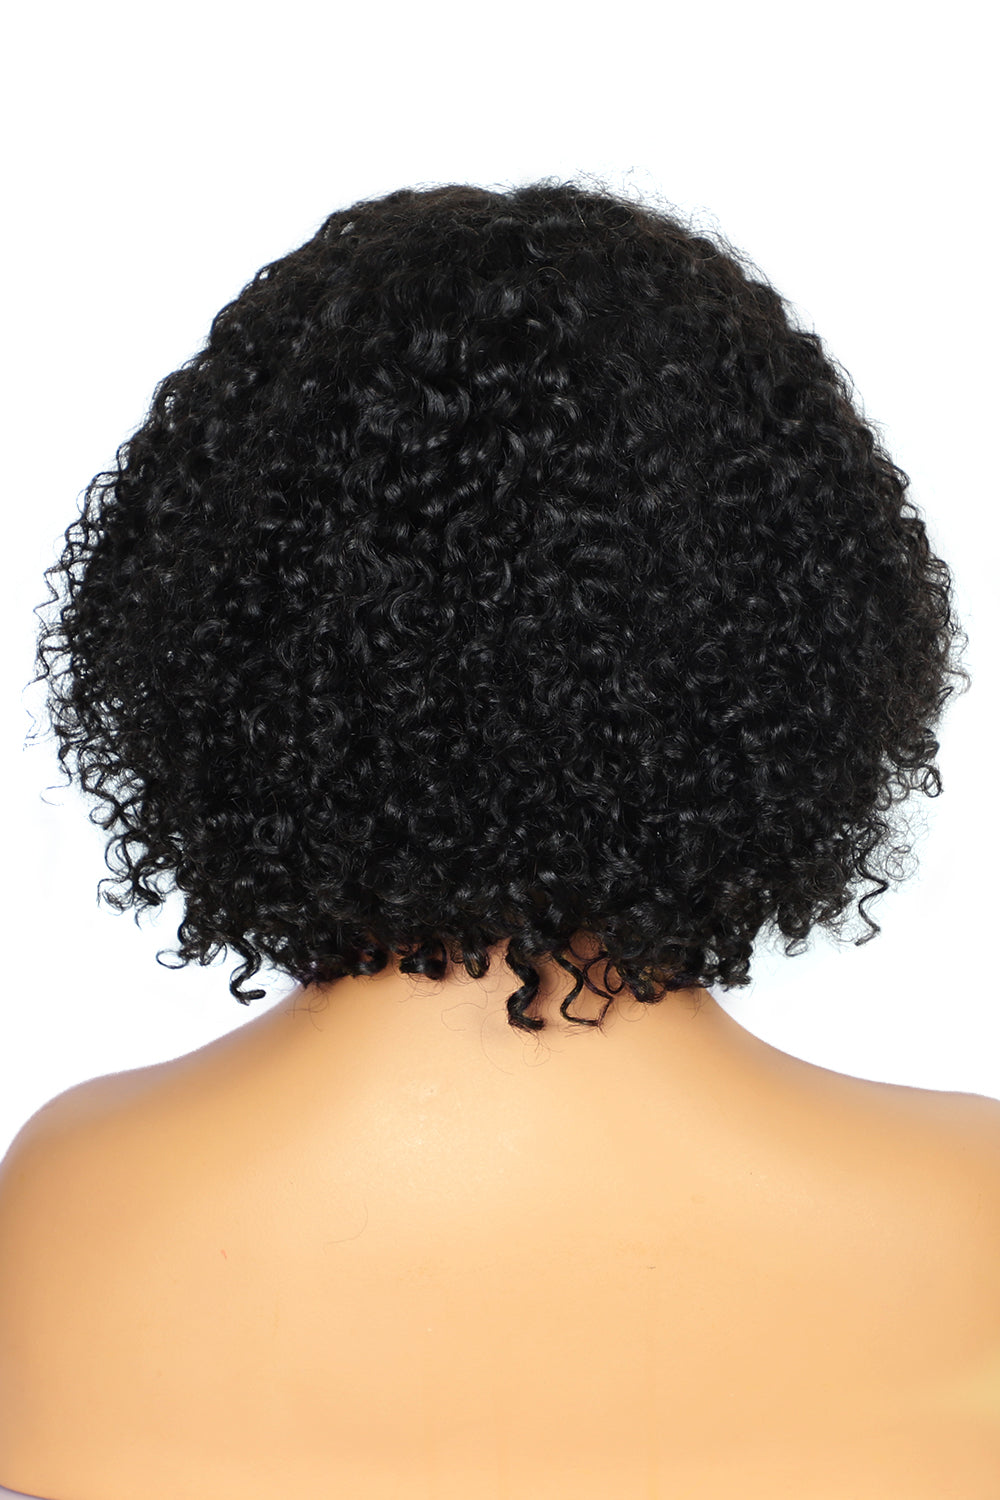 no_glue_lace_top_wigs_curly_bob_human_hair_with_bangs-back